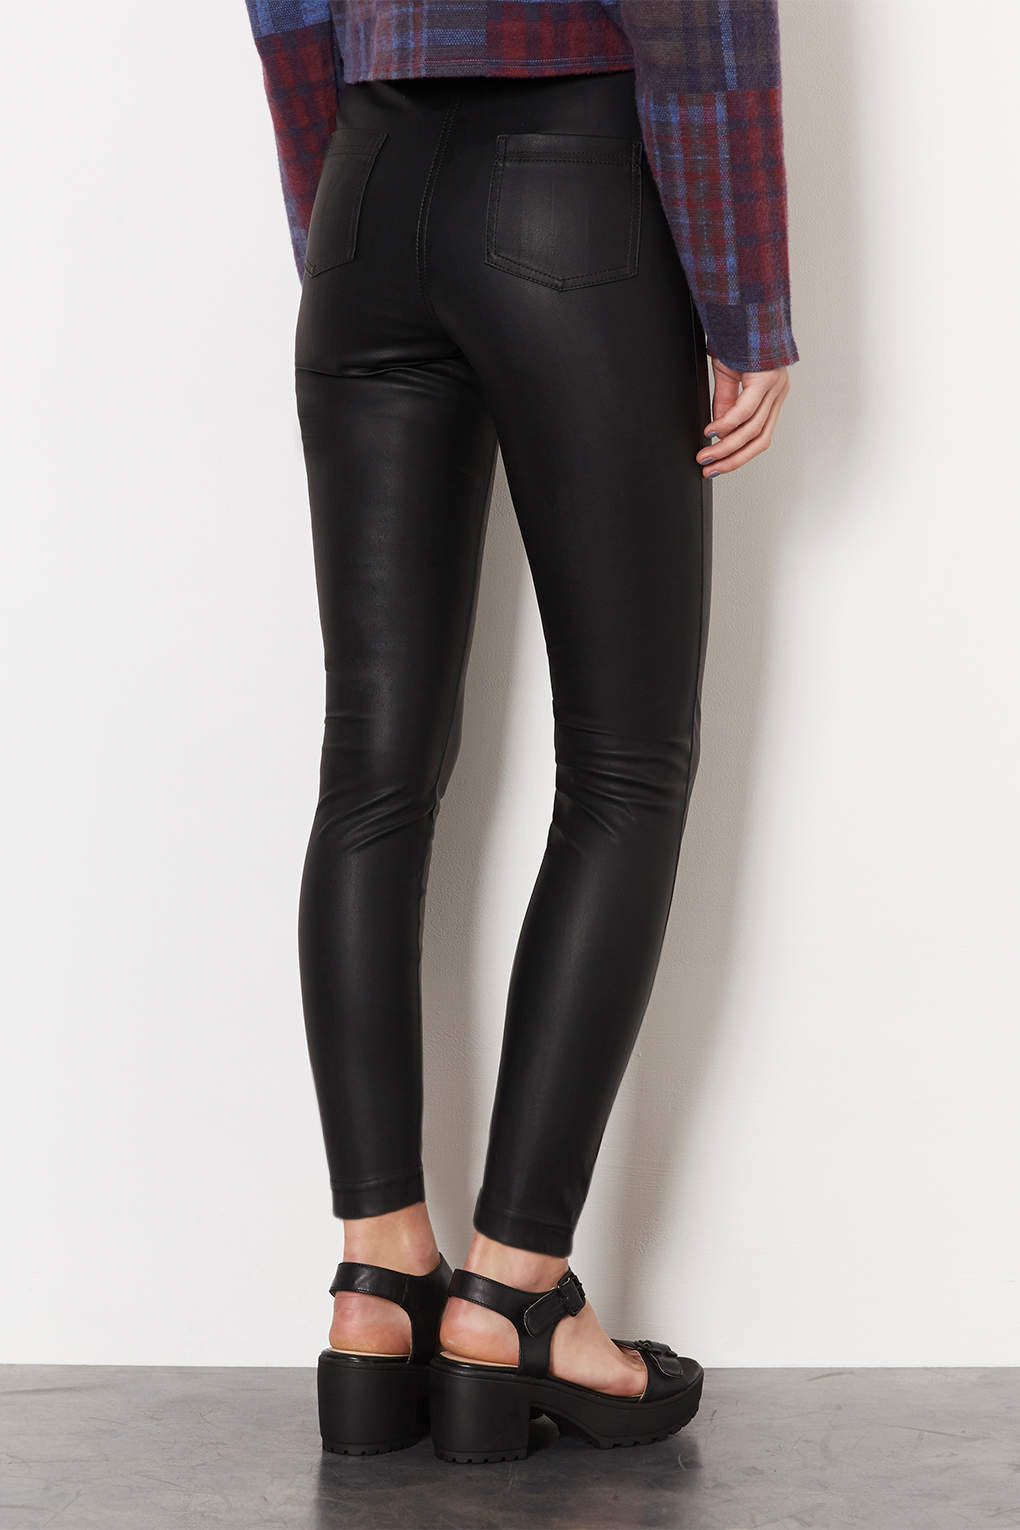 Topshop Leather Trousers Belgium, SAVE 59% - aveclumiere.com